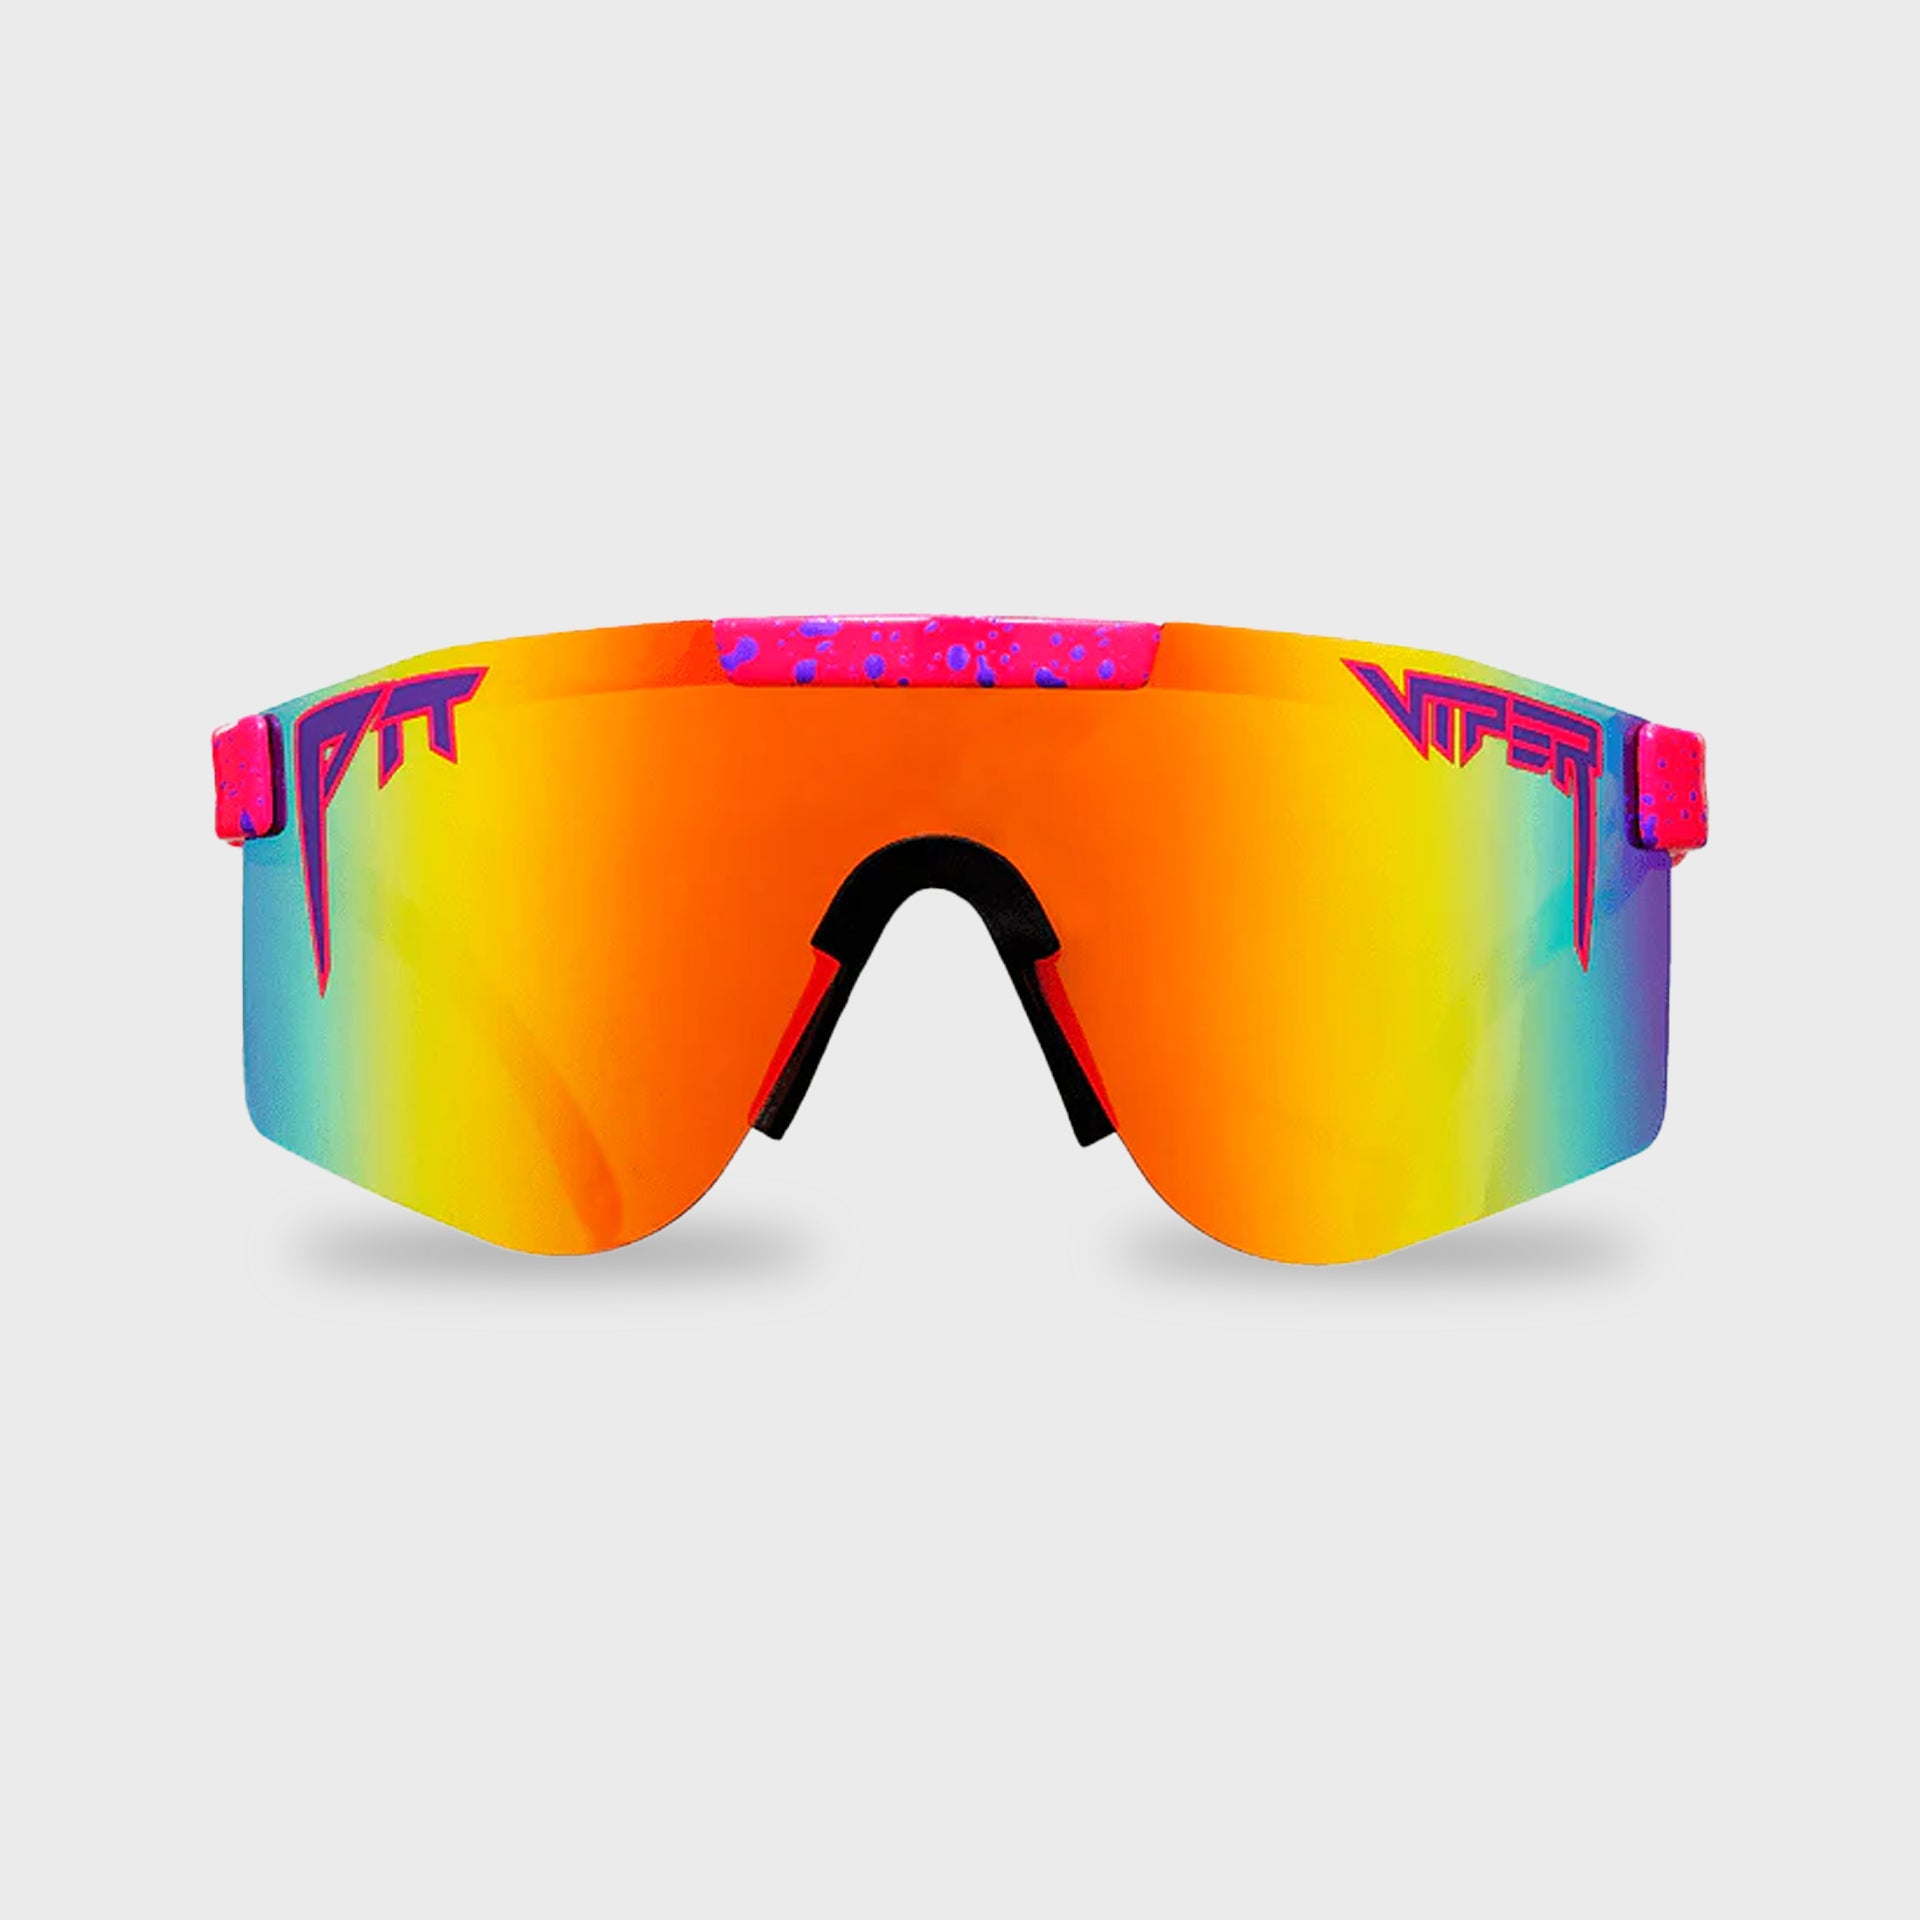 Pit Viper - The Radical Polarized Double Wide Sunglasses - ManGo Surfing